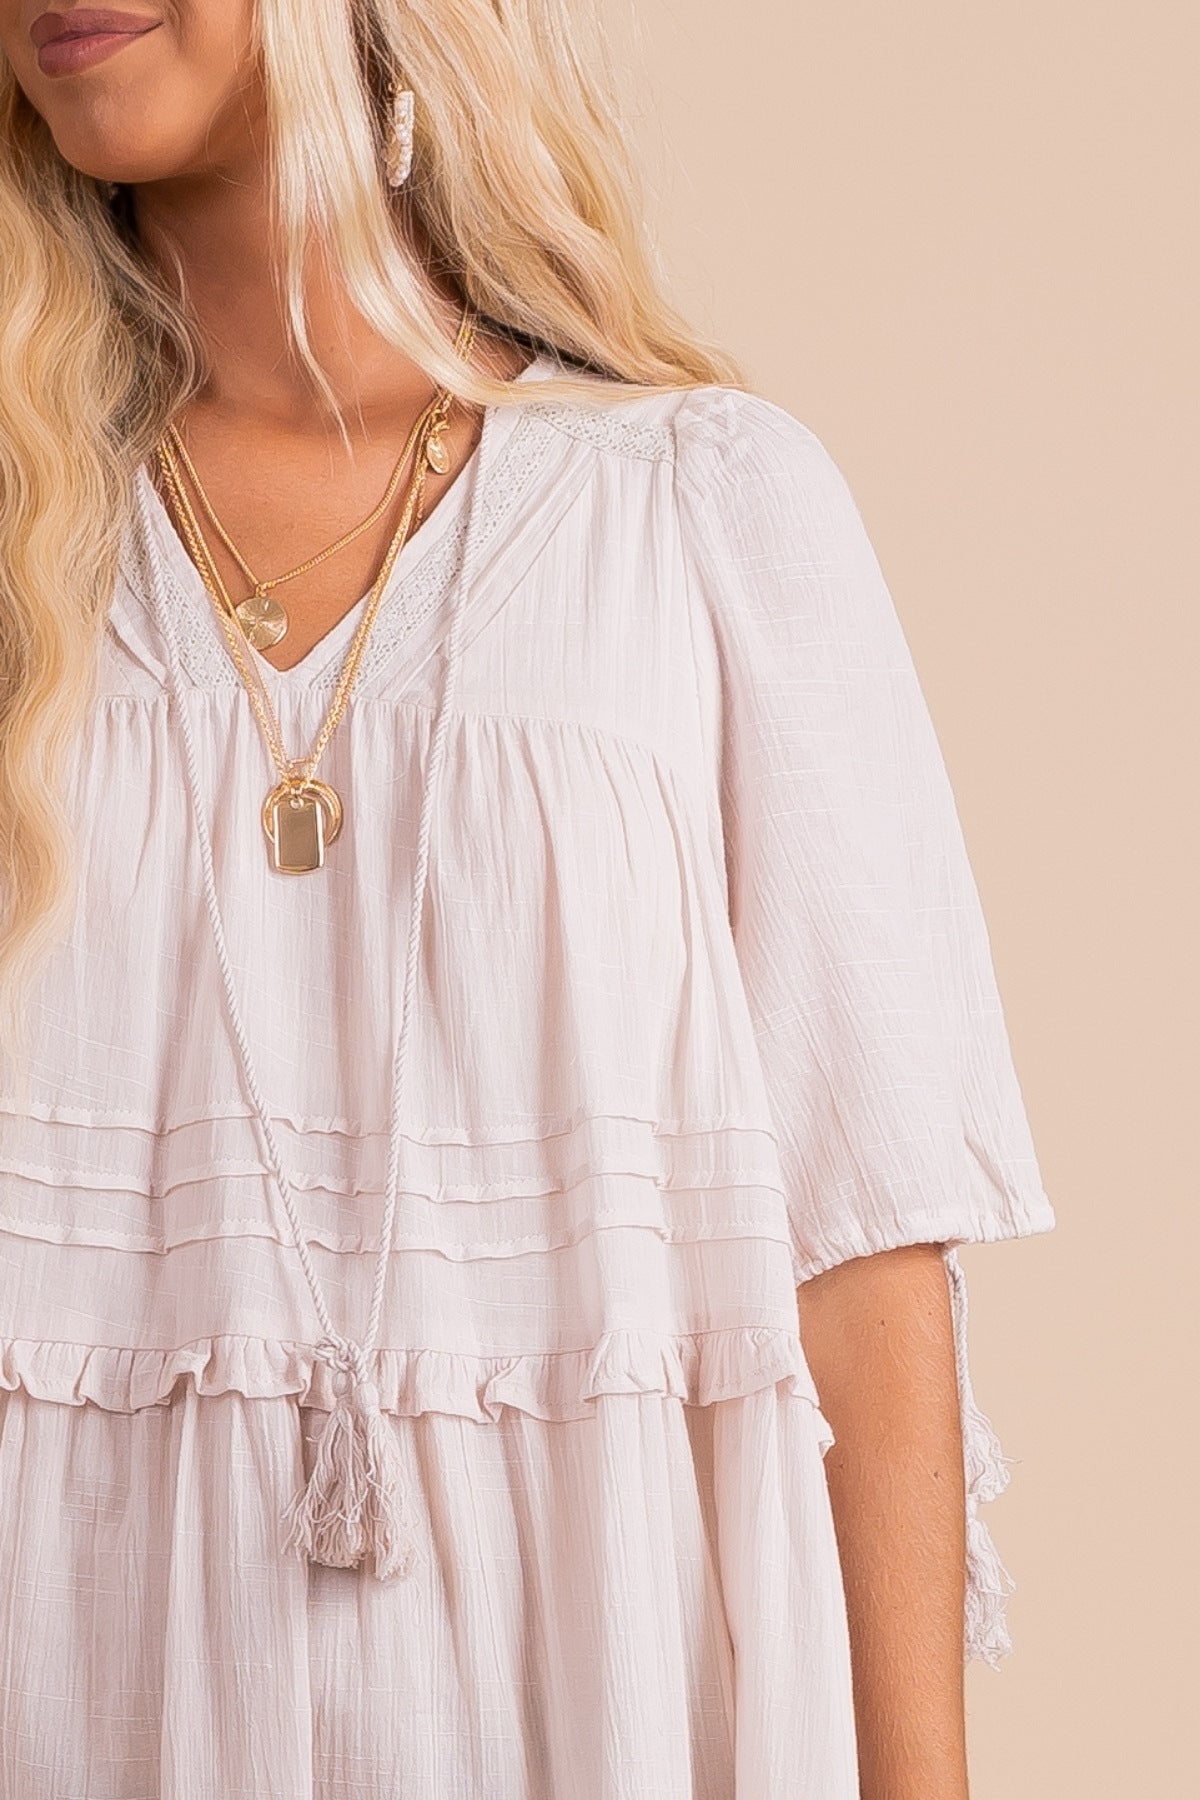 Women's Tent-Style Boho Midi Dress with Pleated Ruffles, Tassel Tie, and Short Sleeves in Off White